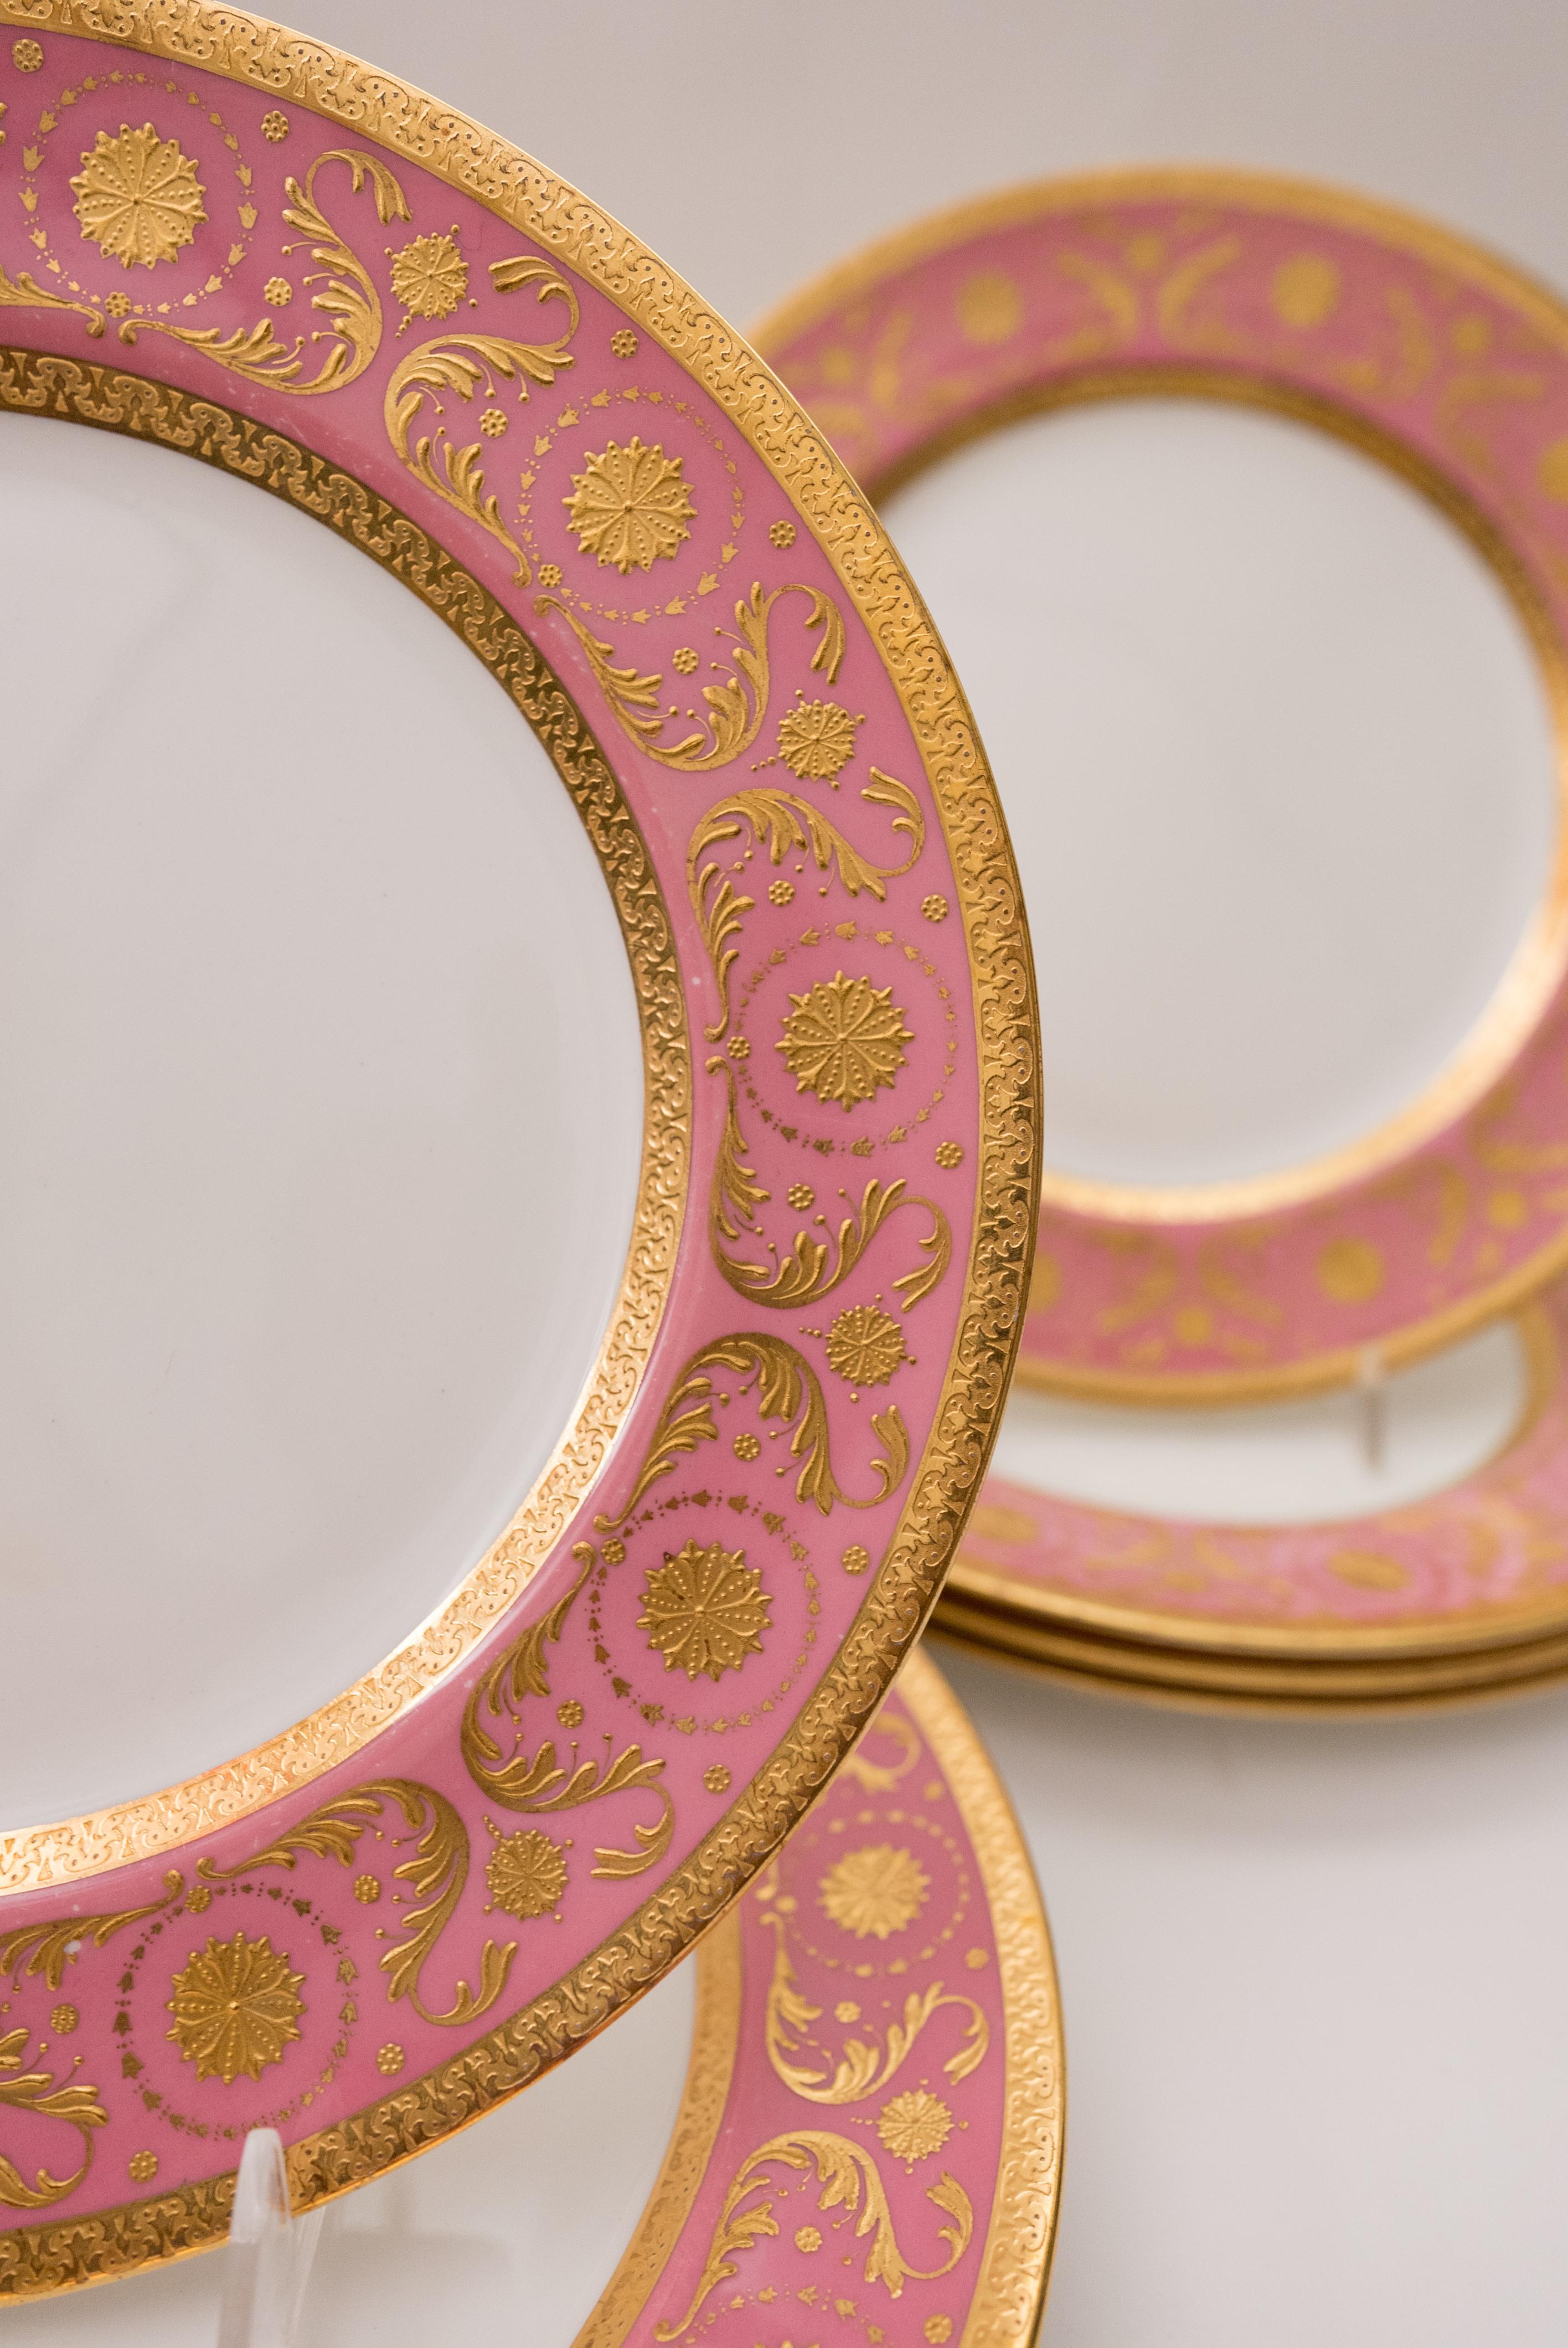 Hand-Crafted 12 Pink & Raised Gold Encrusted Dinner Plates, Antique English, Circa 1910